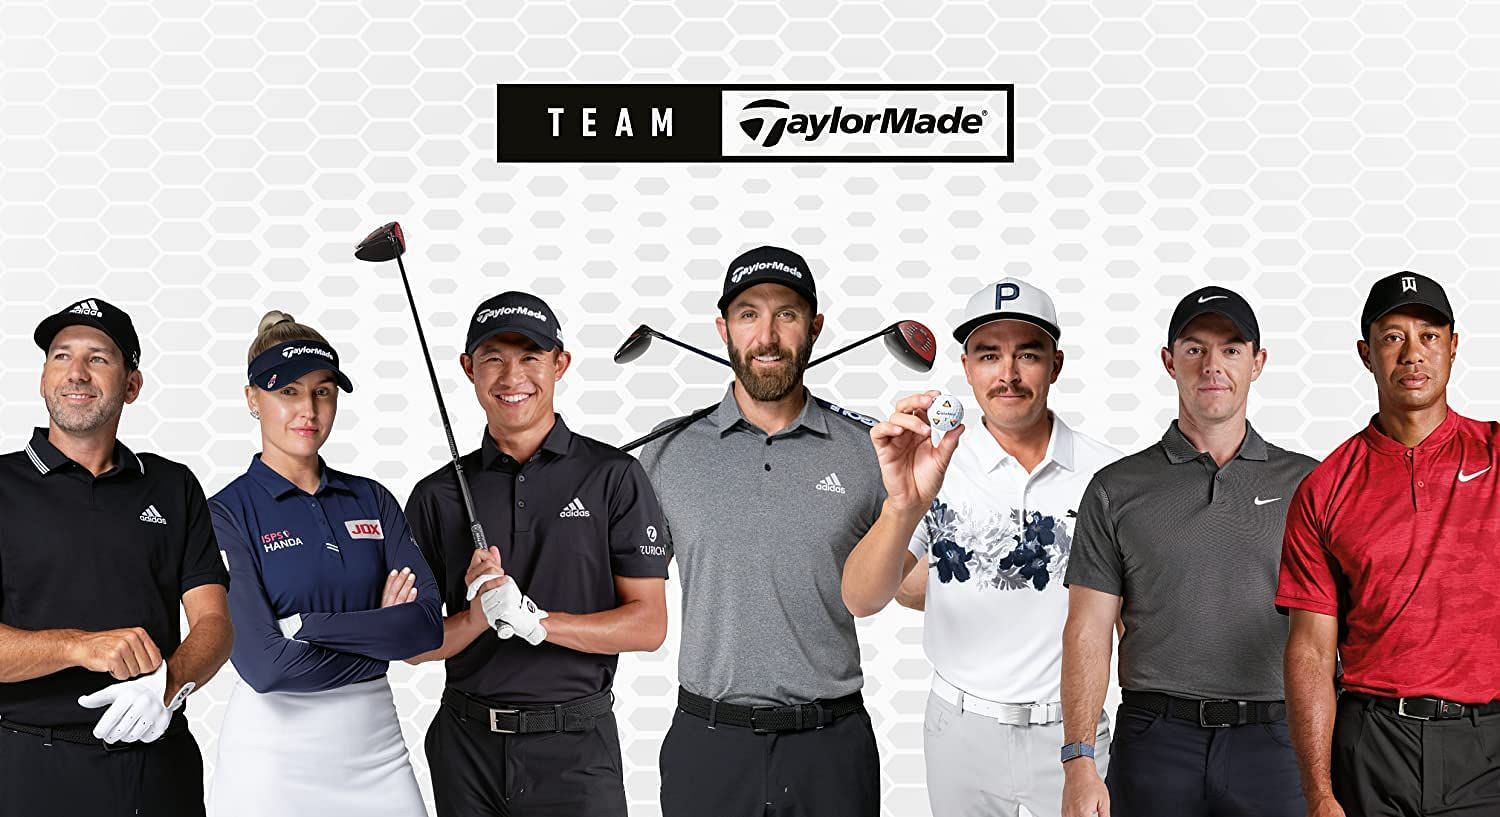 Old TaylorMade ad featuring Dustin Johnson, Tiger Woods, Rory McIlroy